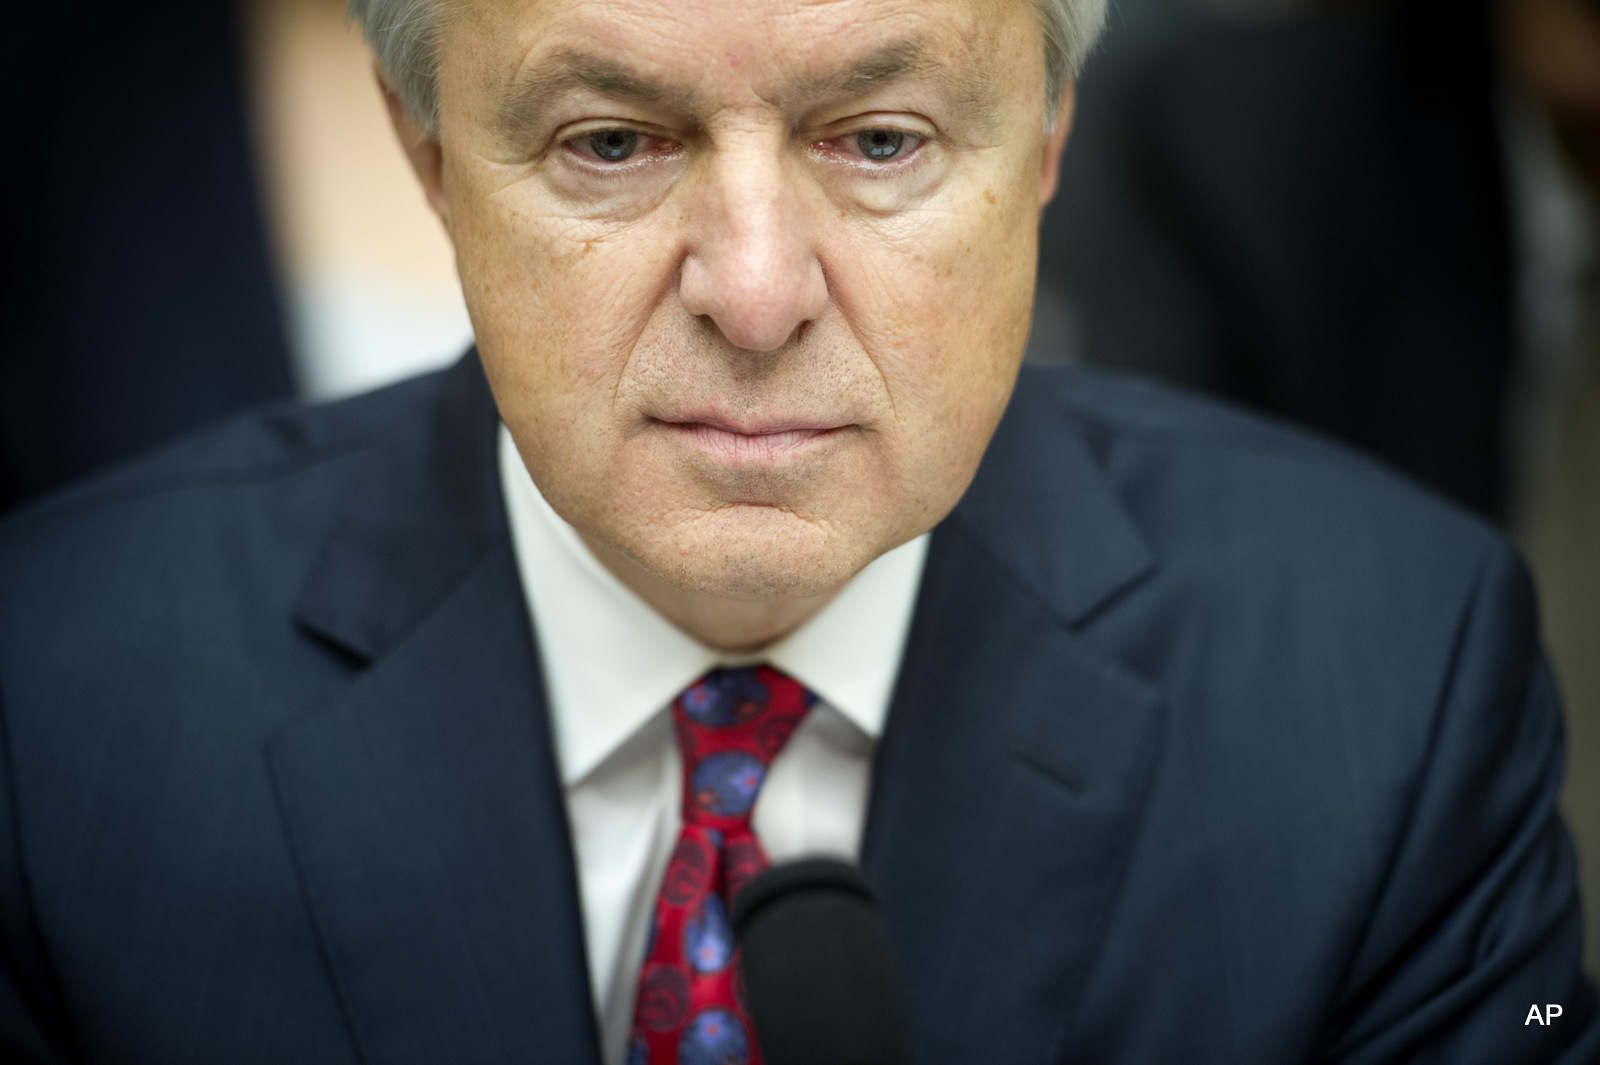 Wells Fargo CEO John Stumpf testifies on Capitol Hill in Washington, before the House Financial Services Committee investigating Wells Fargo's opening of unauthorized customer accounts.